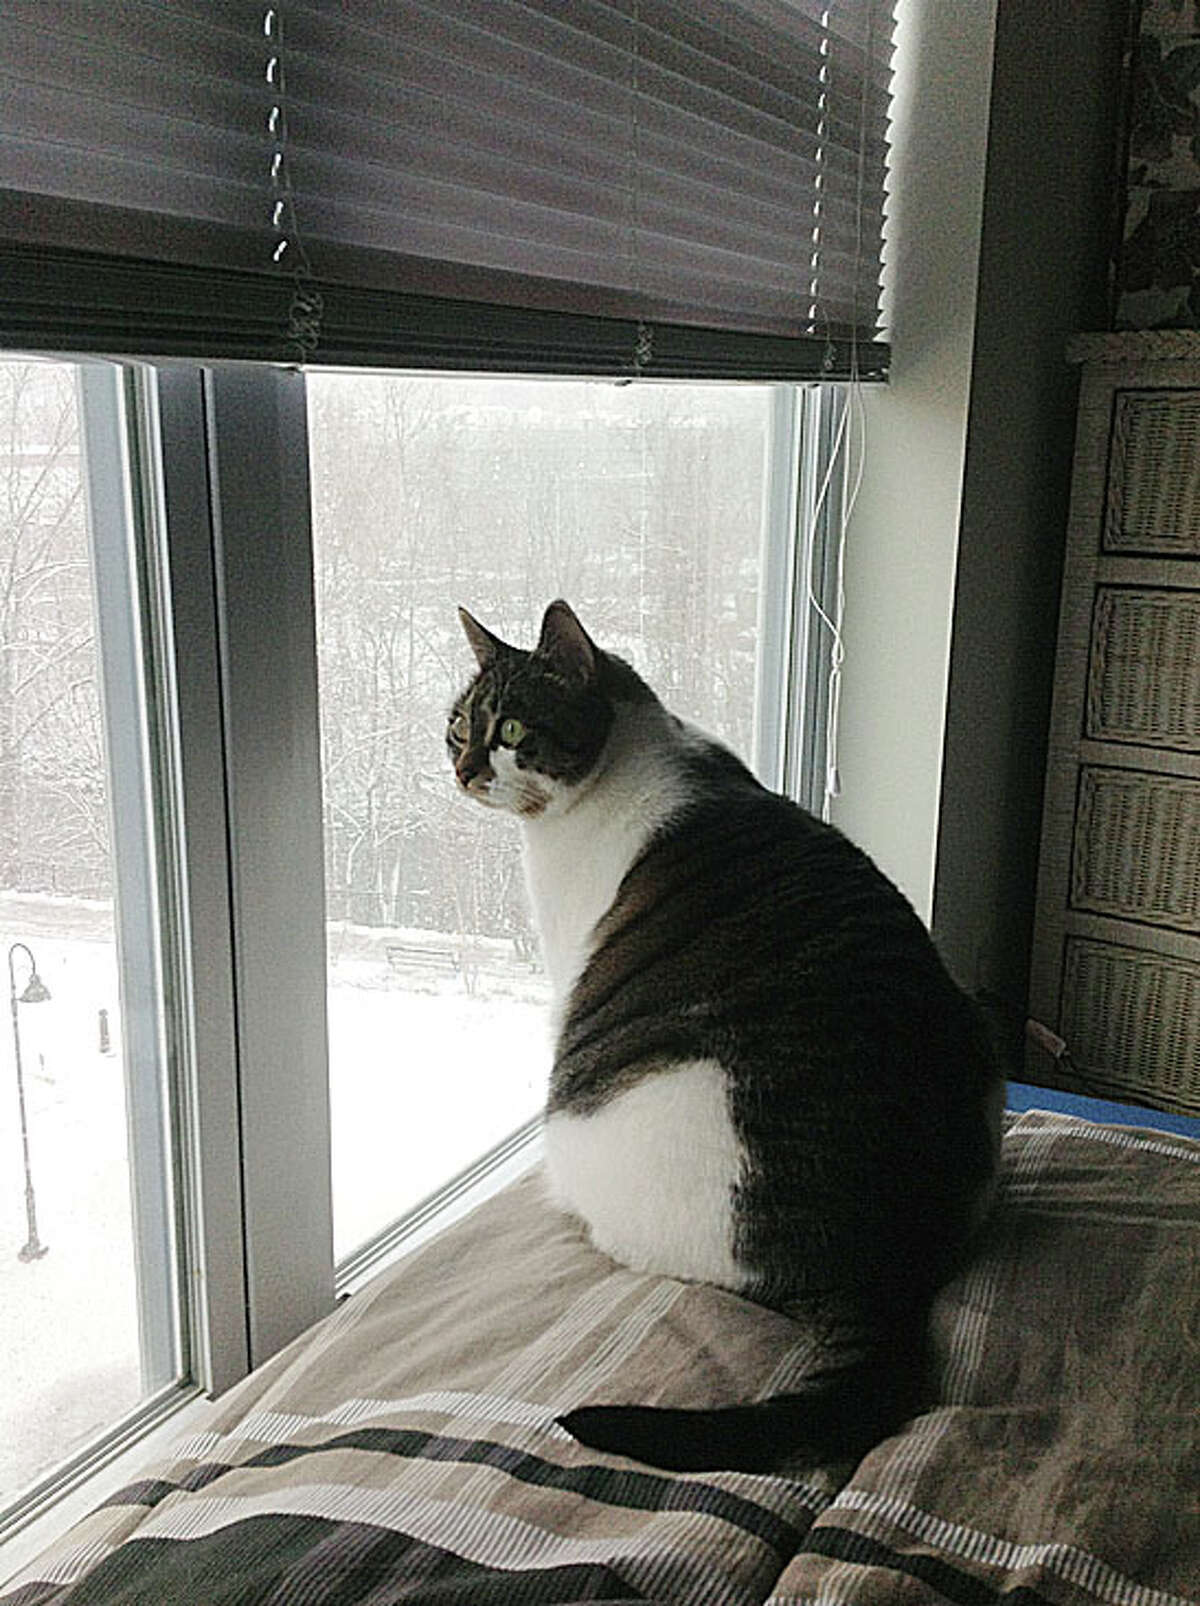 Bella tries to catch snowflakes by the window Friday morning. By Jan Matregrano